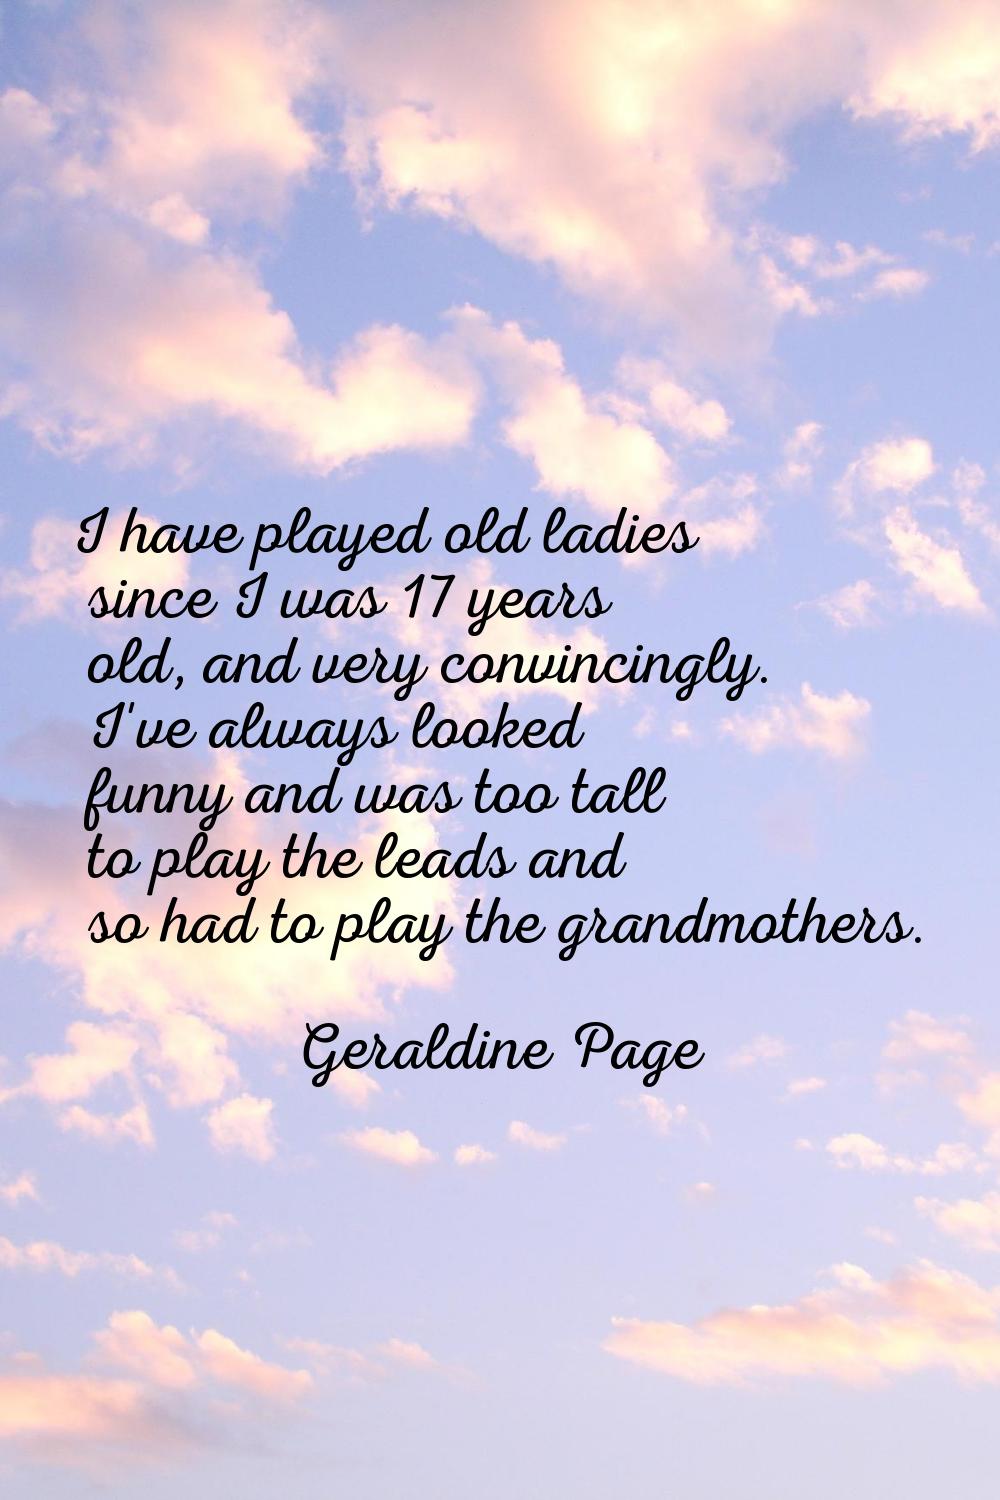 I have played old ladies since I was 17 years old, and very convincingly. I've always looked funny 